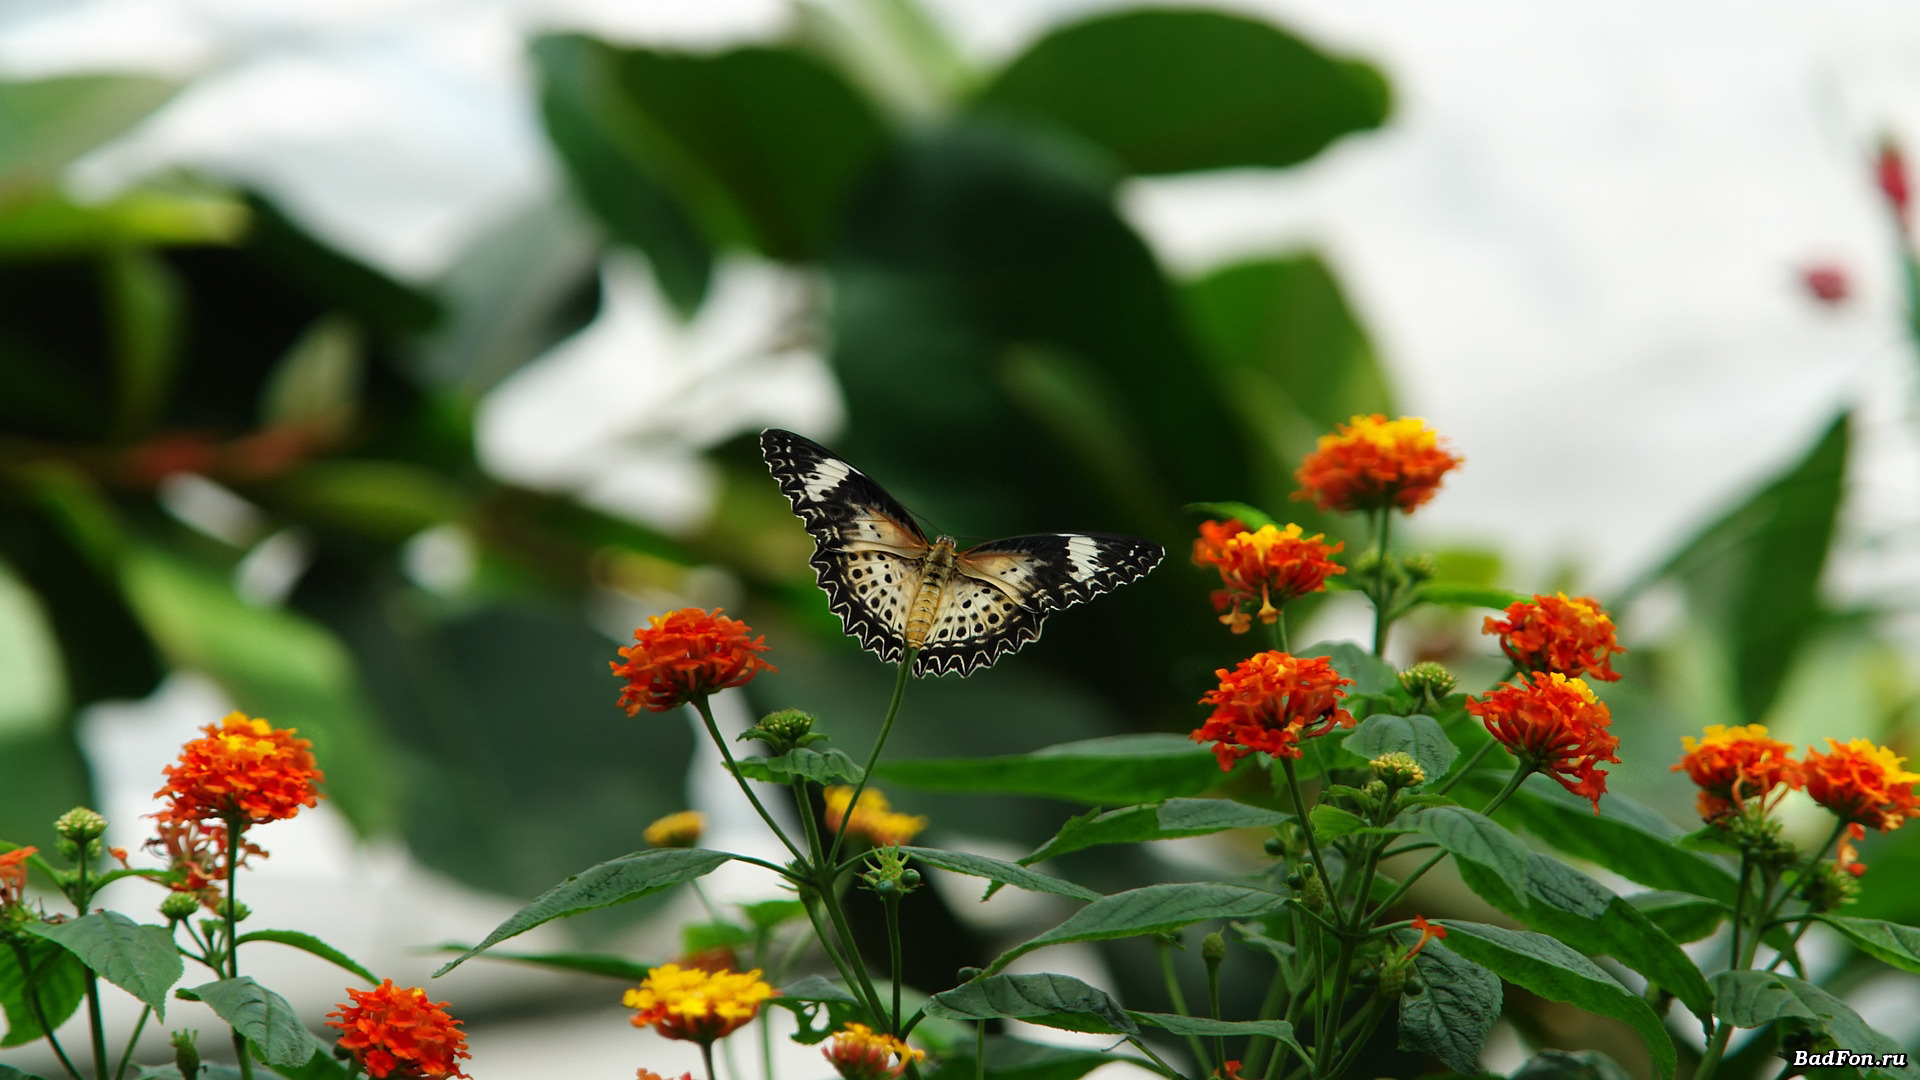 butterfly HD Wallpaper | Background Image | 1920x1080 | ID ...